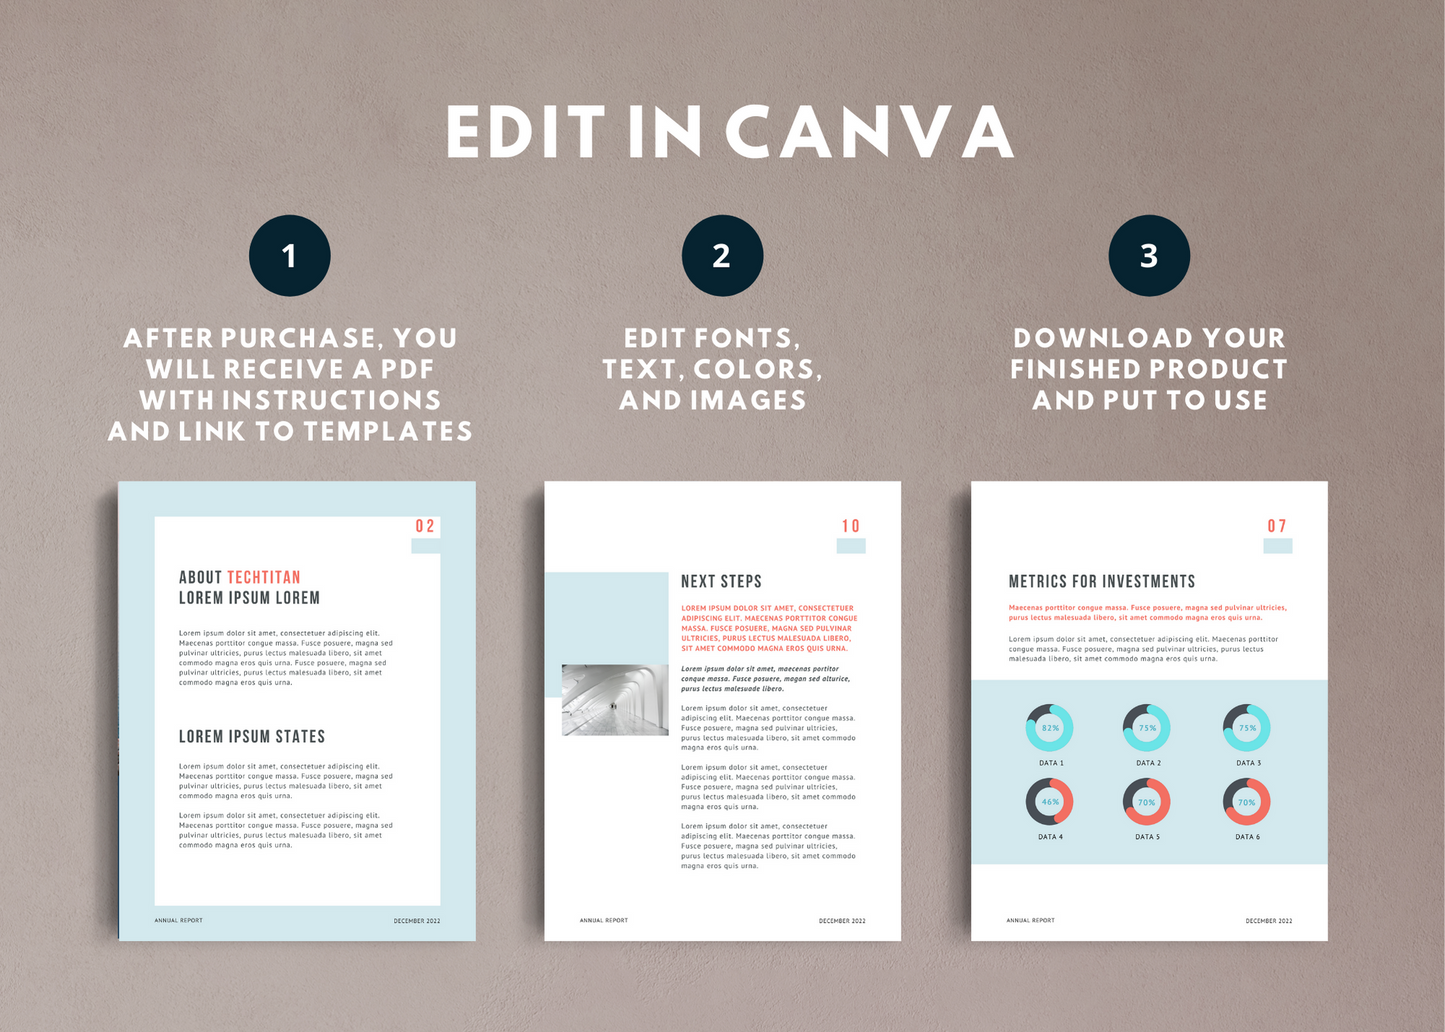 Annual Report Template | Canva Template | Word Template | Marketing Report Template